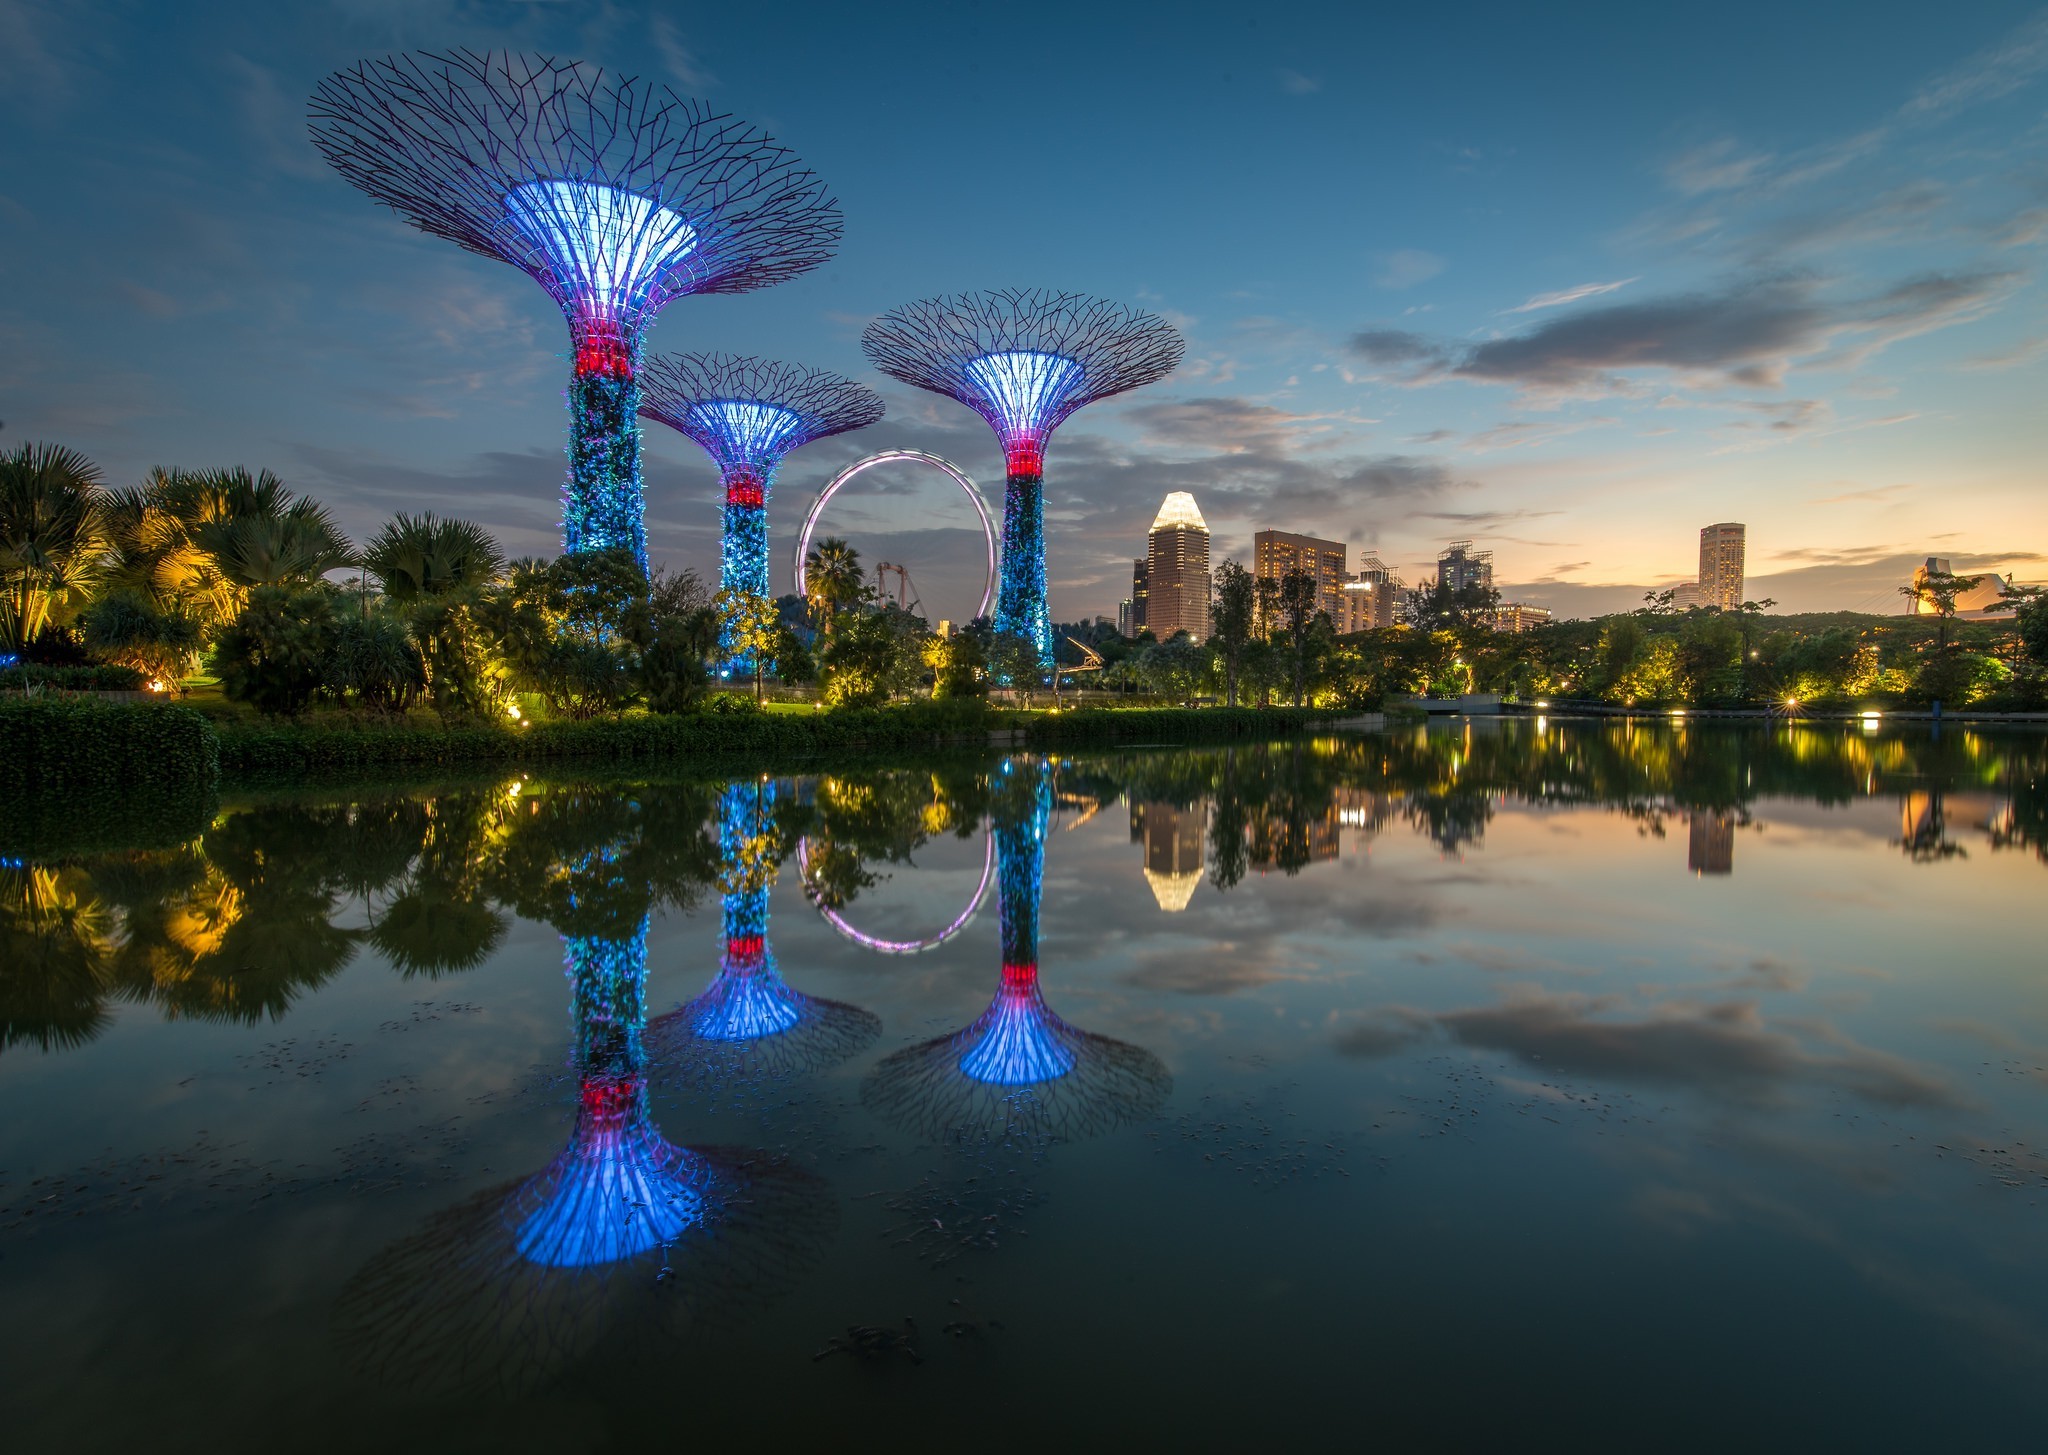 photography, Nature, Clouds, Landscape, Lake, Reflection, Architecture, Trees, City, Lights, Sky, Singapore Wallpaper